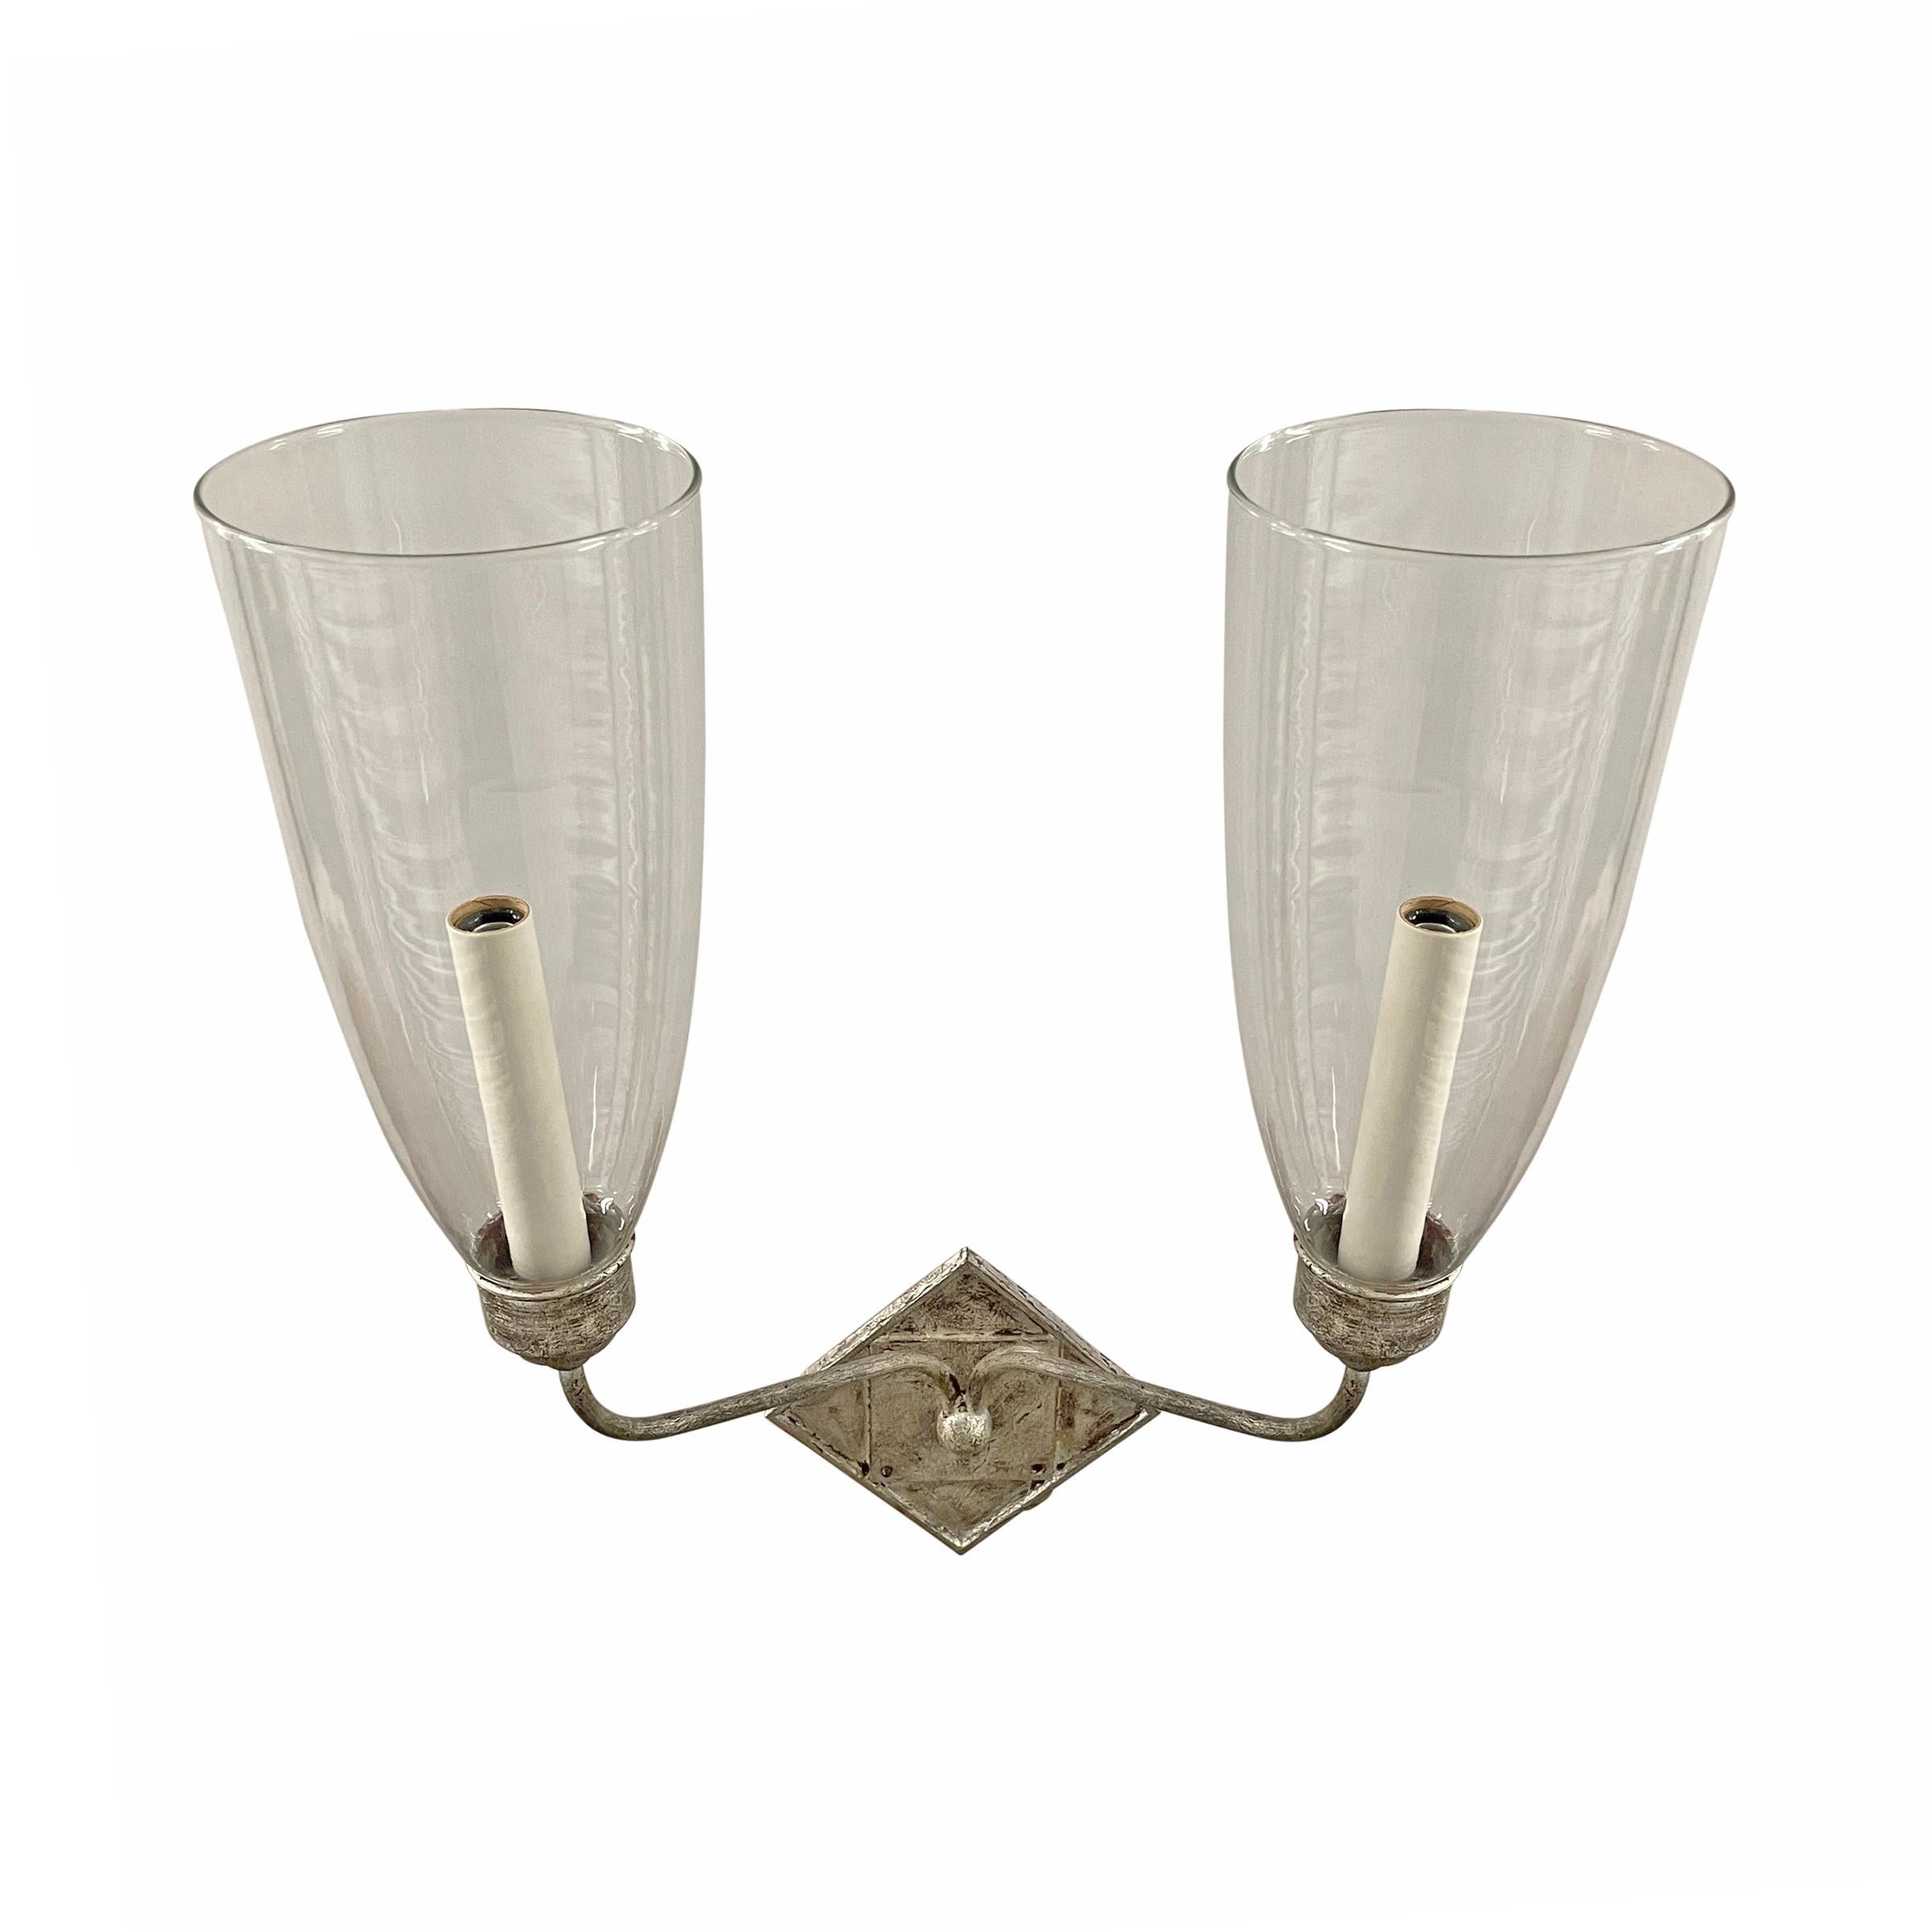 Pair of Two-Arm Sconces with Hurricane Shades 1